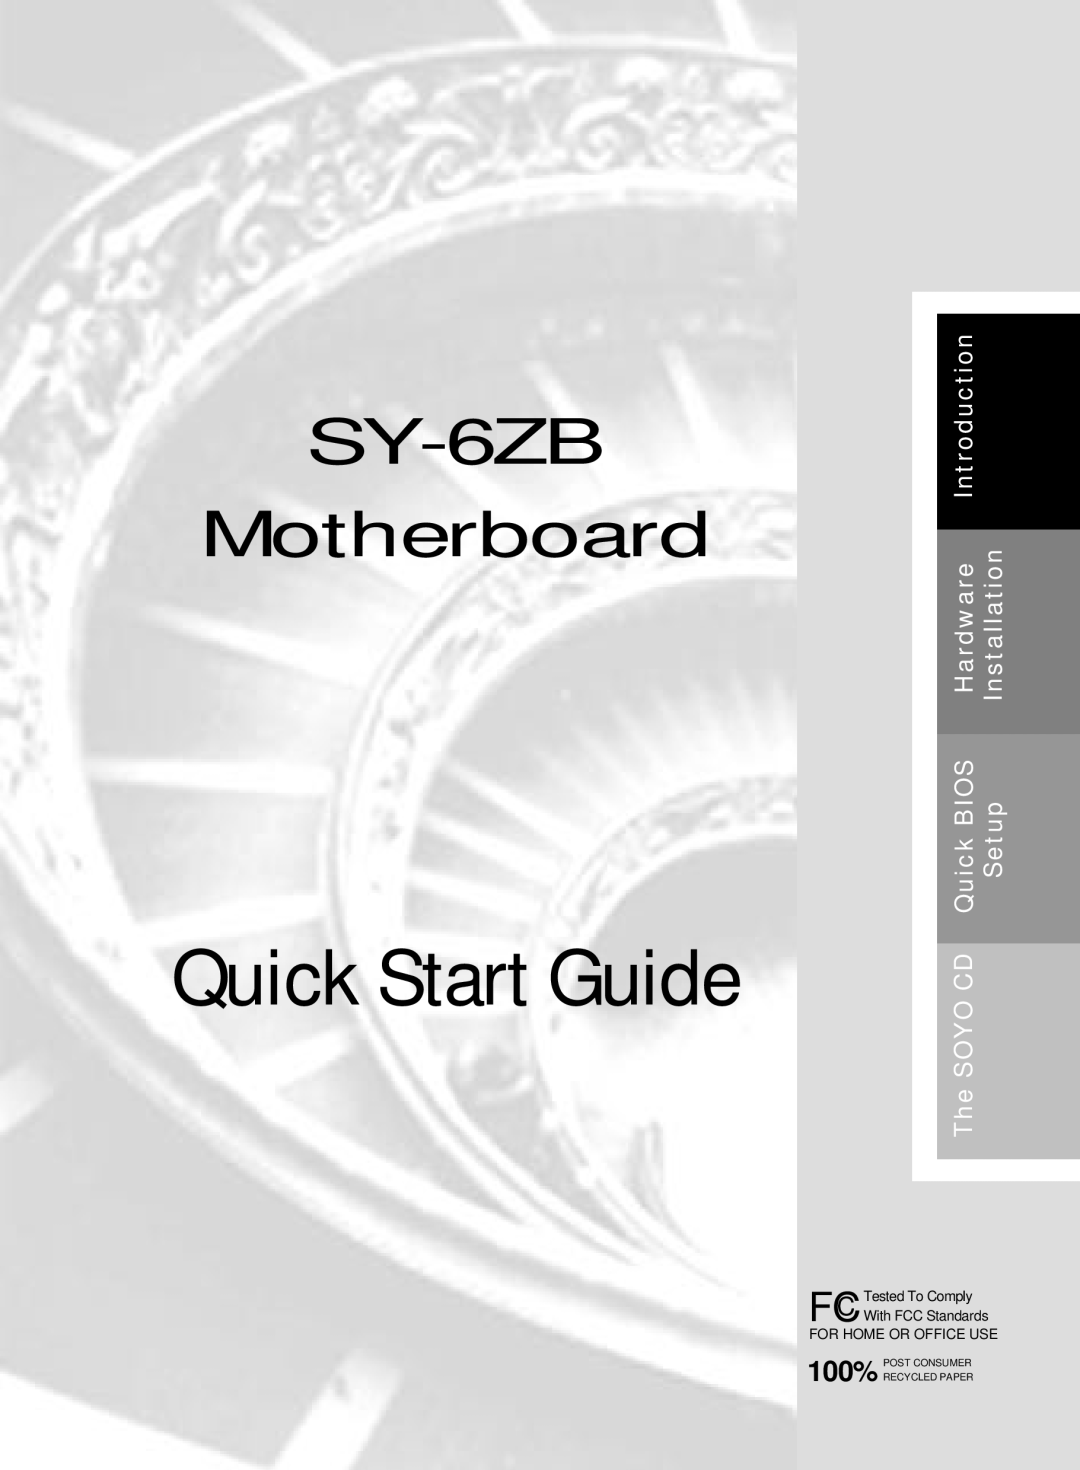 SOYO SY-6ZB Motherboard quick start Introduction, Hardware, Installation, Quick BIOS, Setup, The SOYO CD 